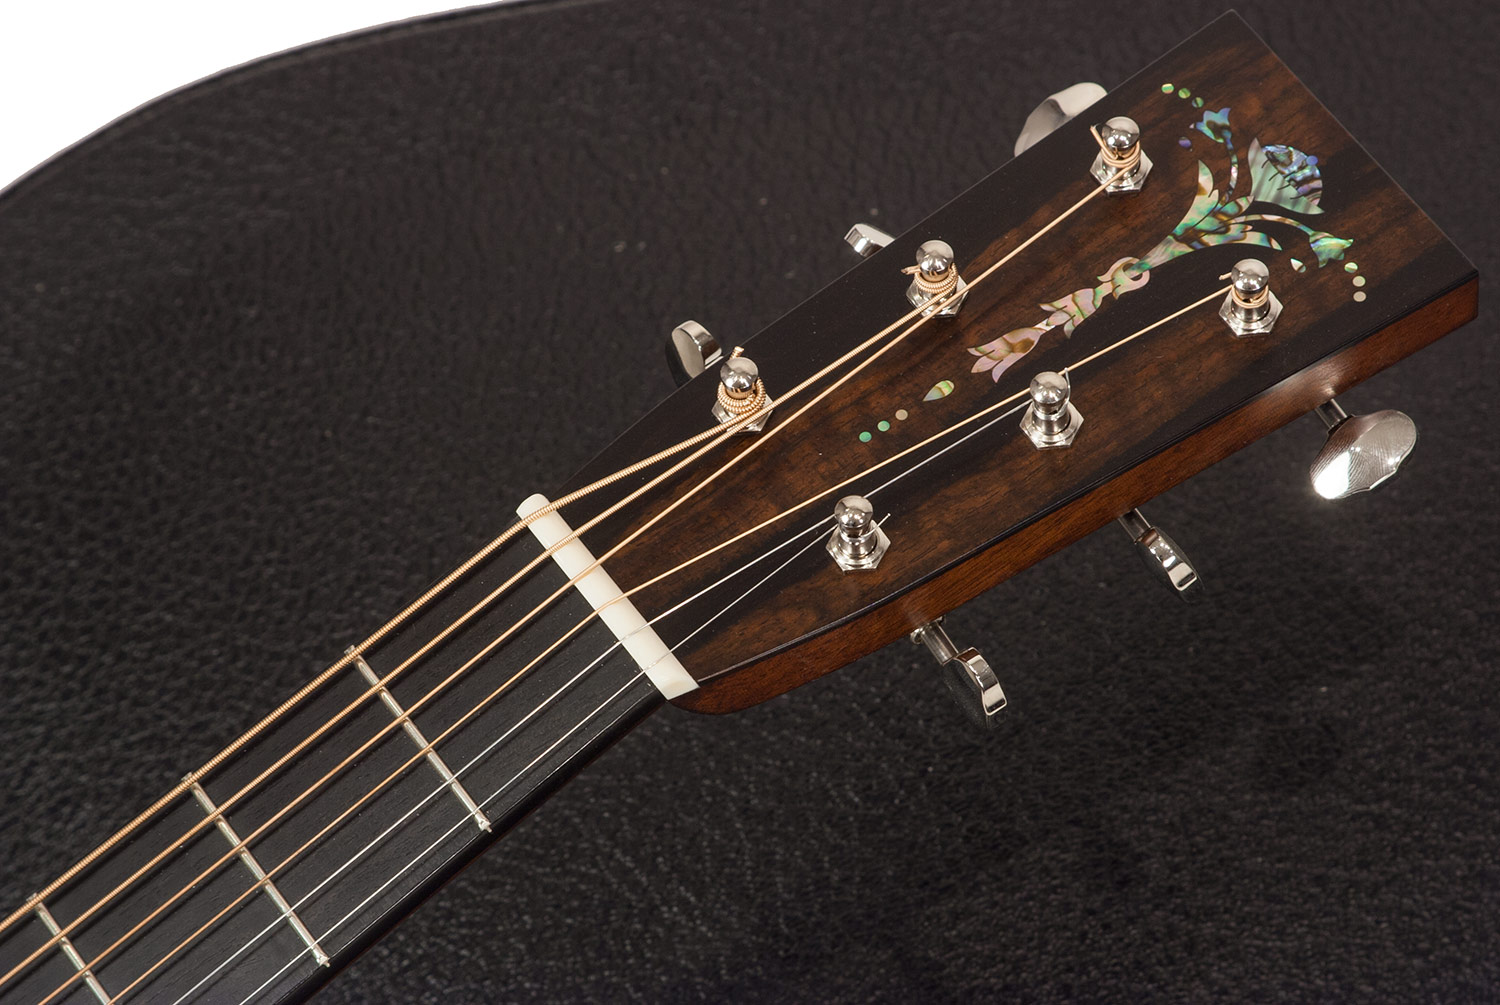 Collings D2h Custom Satin Neck, Torch Head #27113 - Natural - Westerngitarre & electro - Variation 6